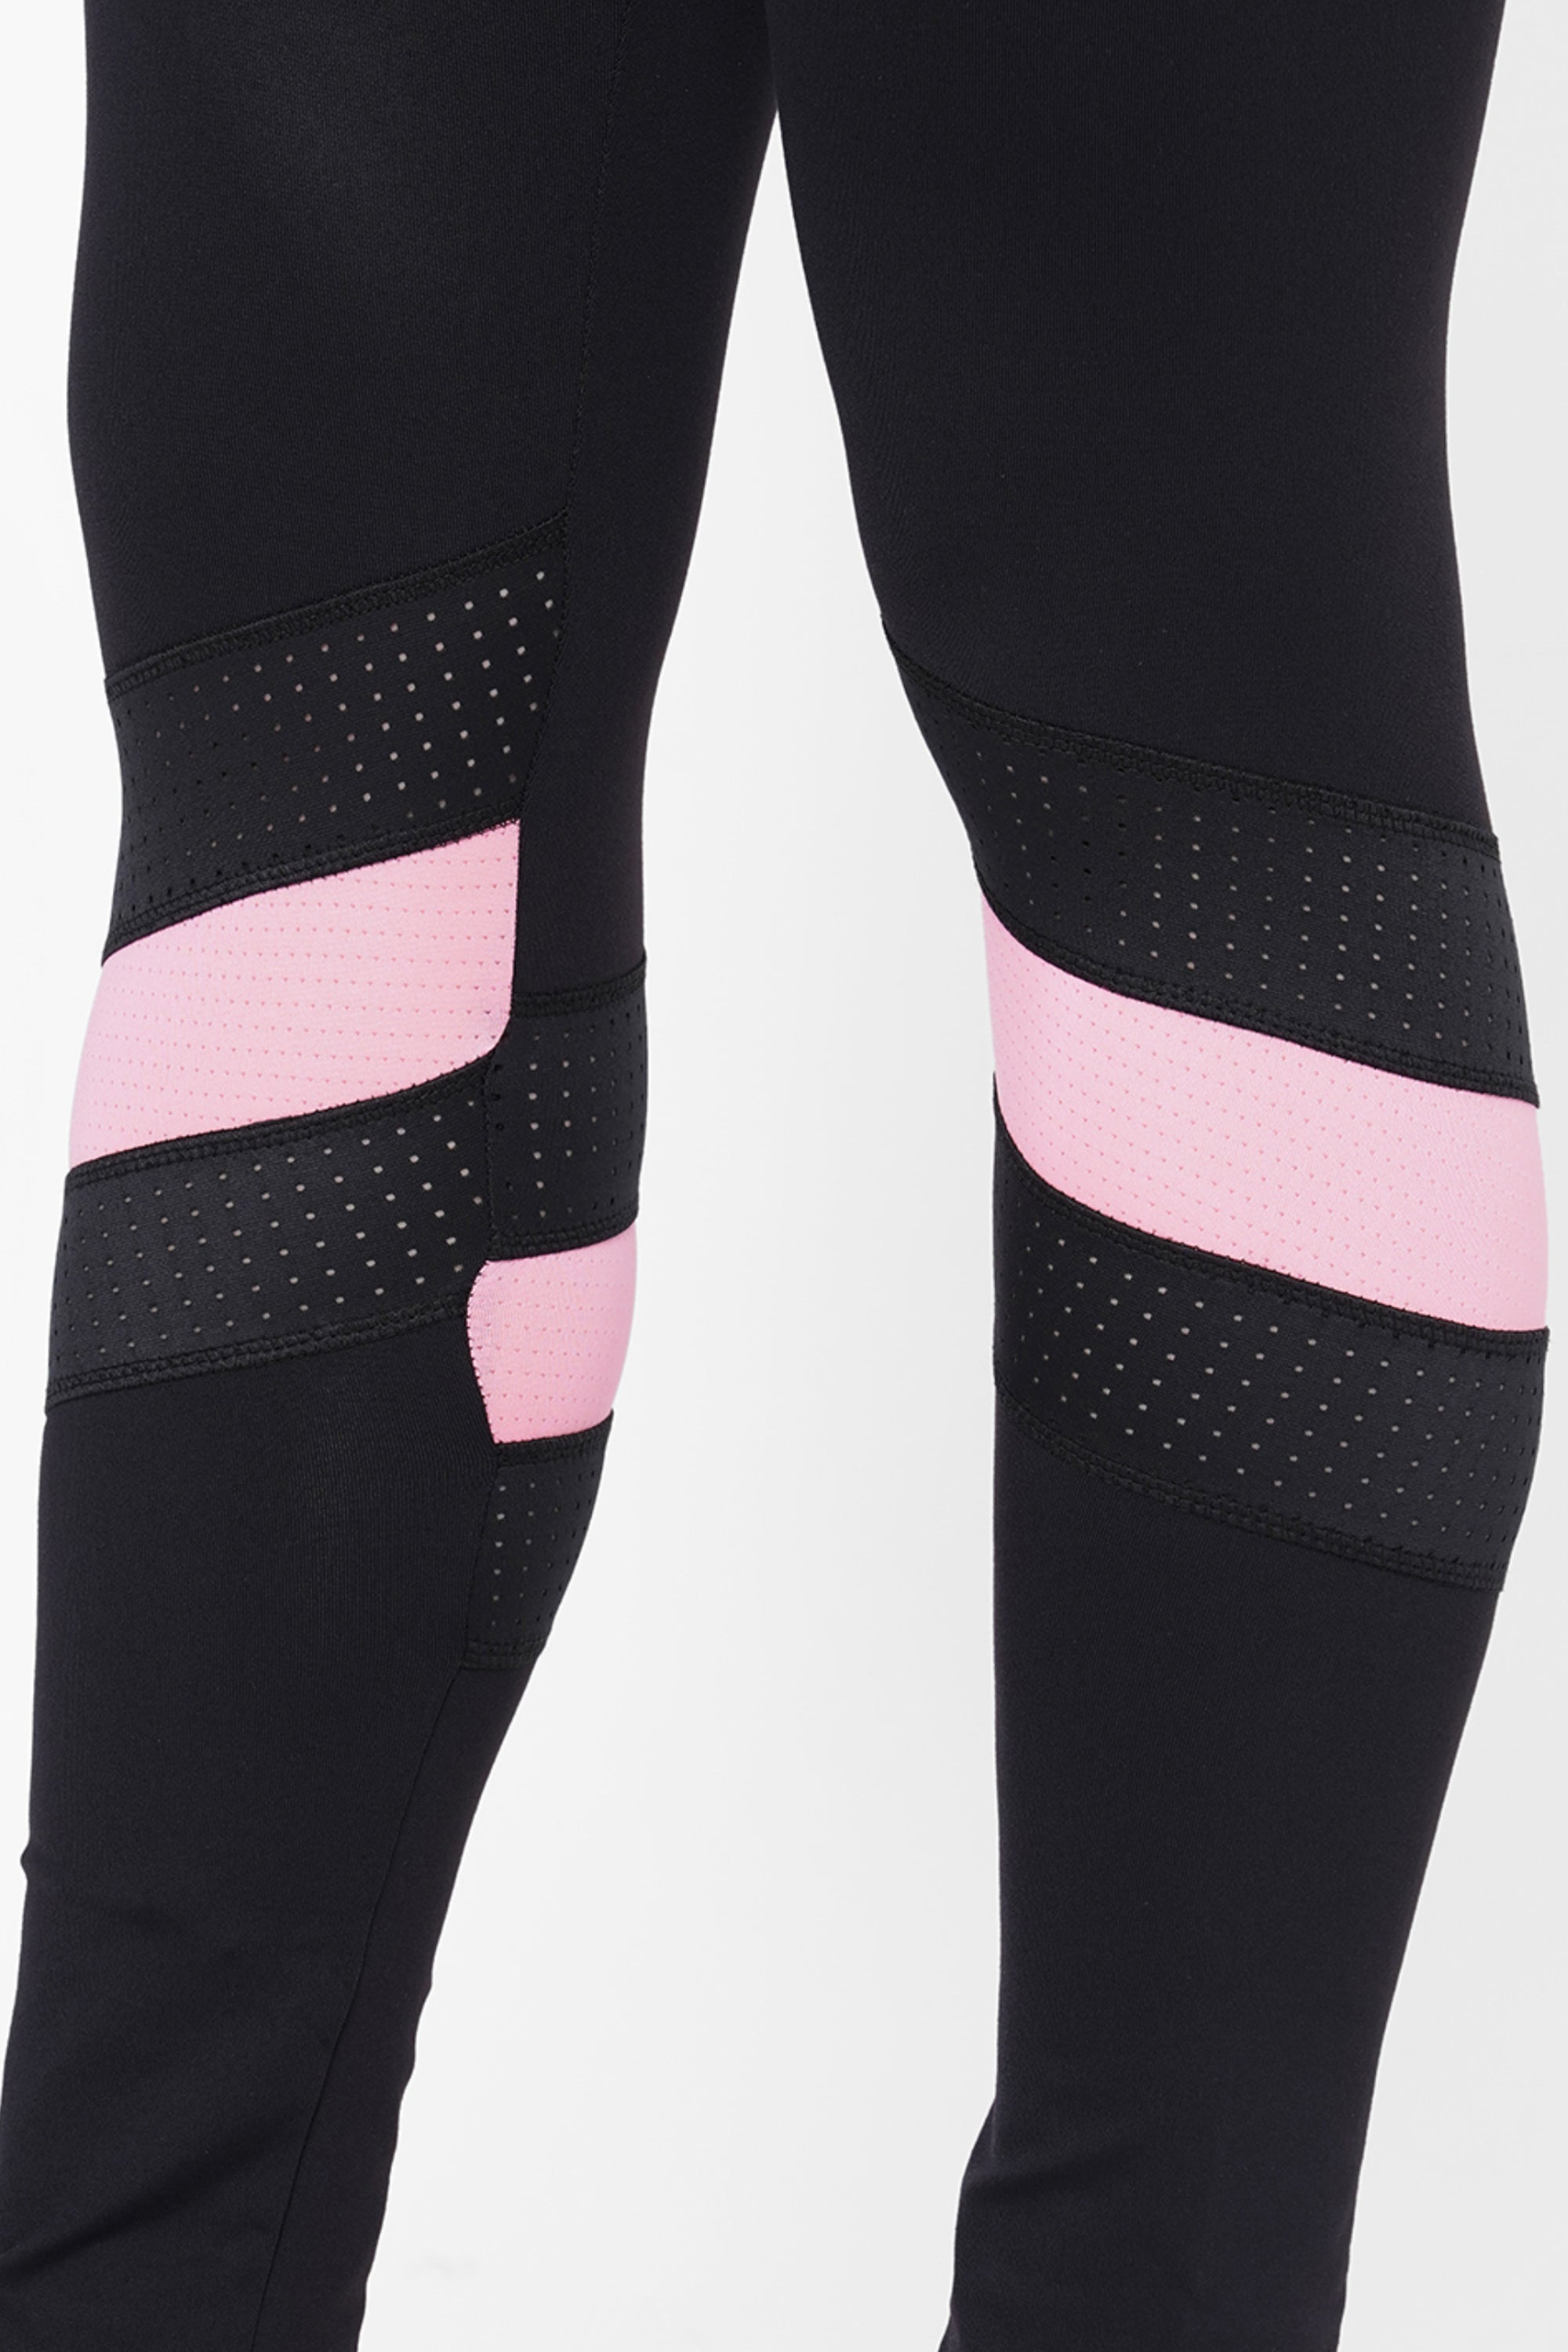 Black High Waisted Compression Legging With a Neon Pink Patch